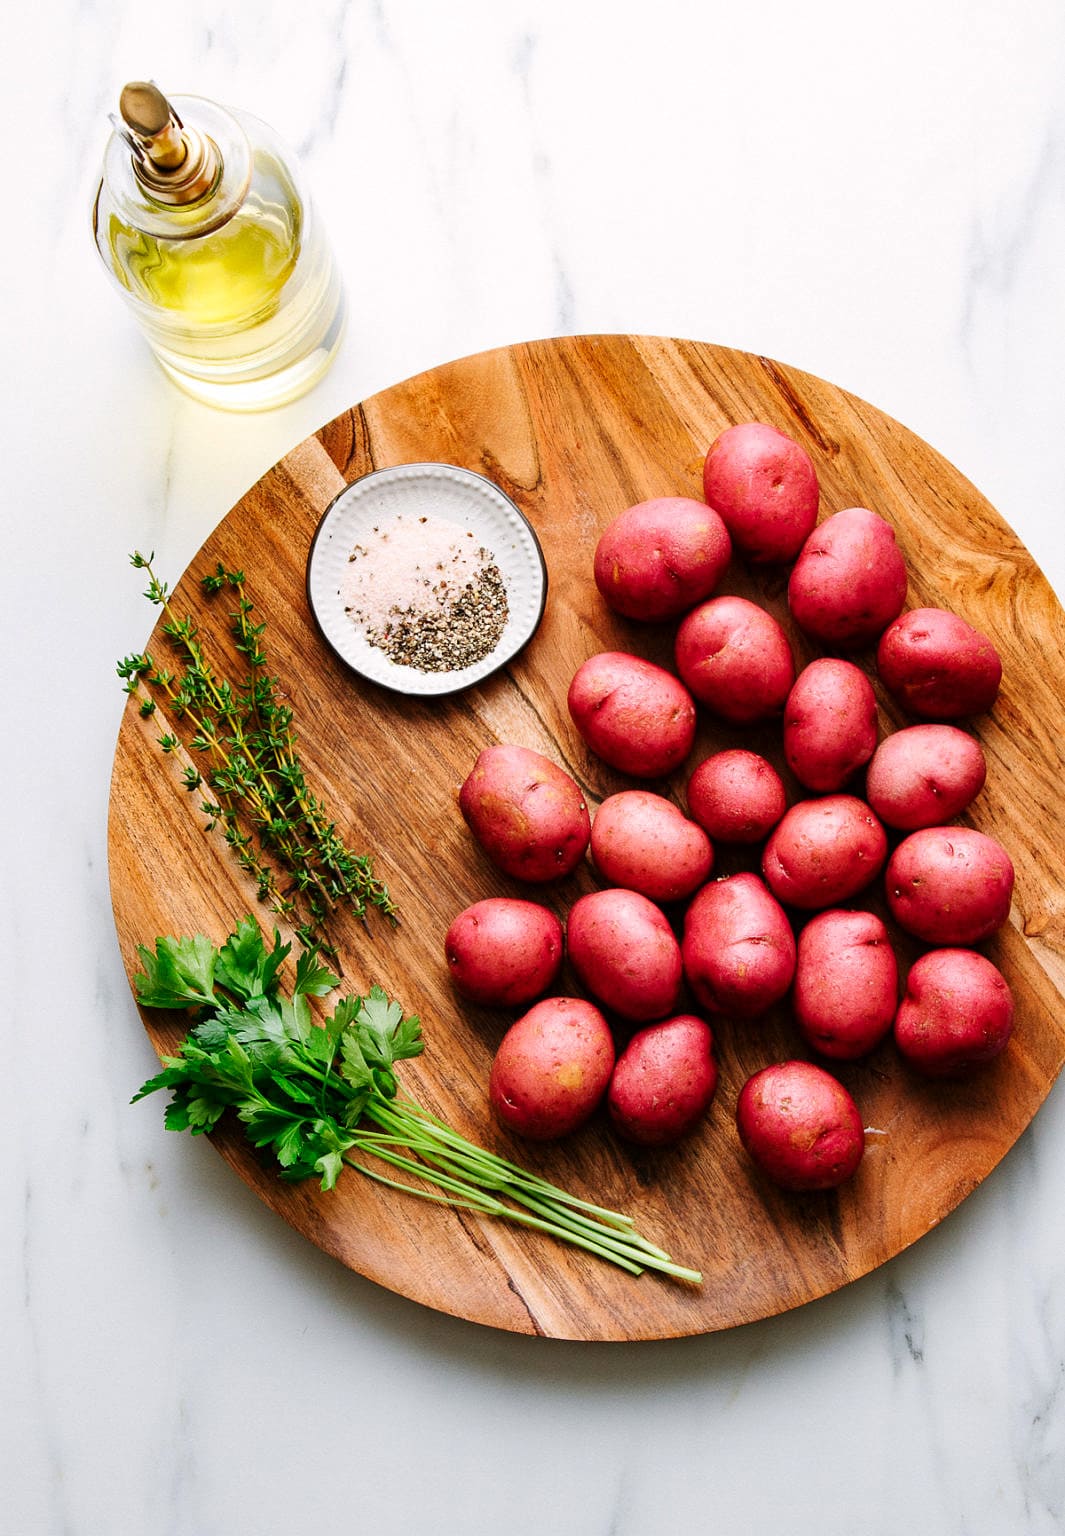 Easy Oven Roasted Red Potatoes The Simple Veganista 